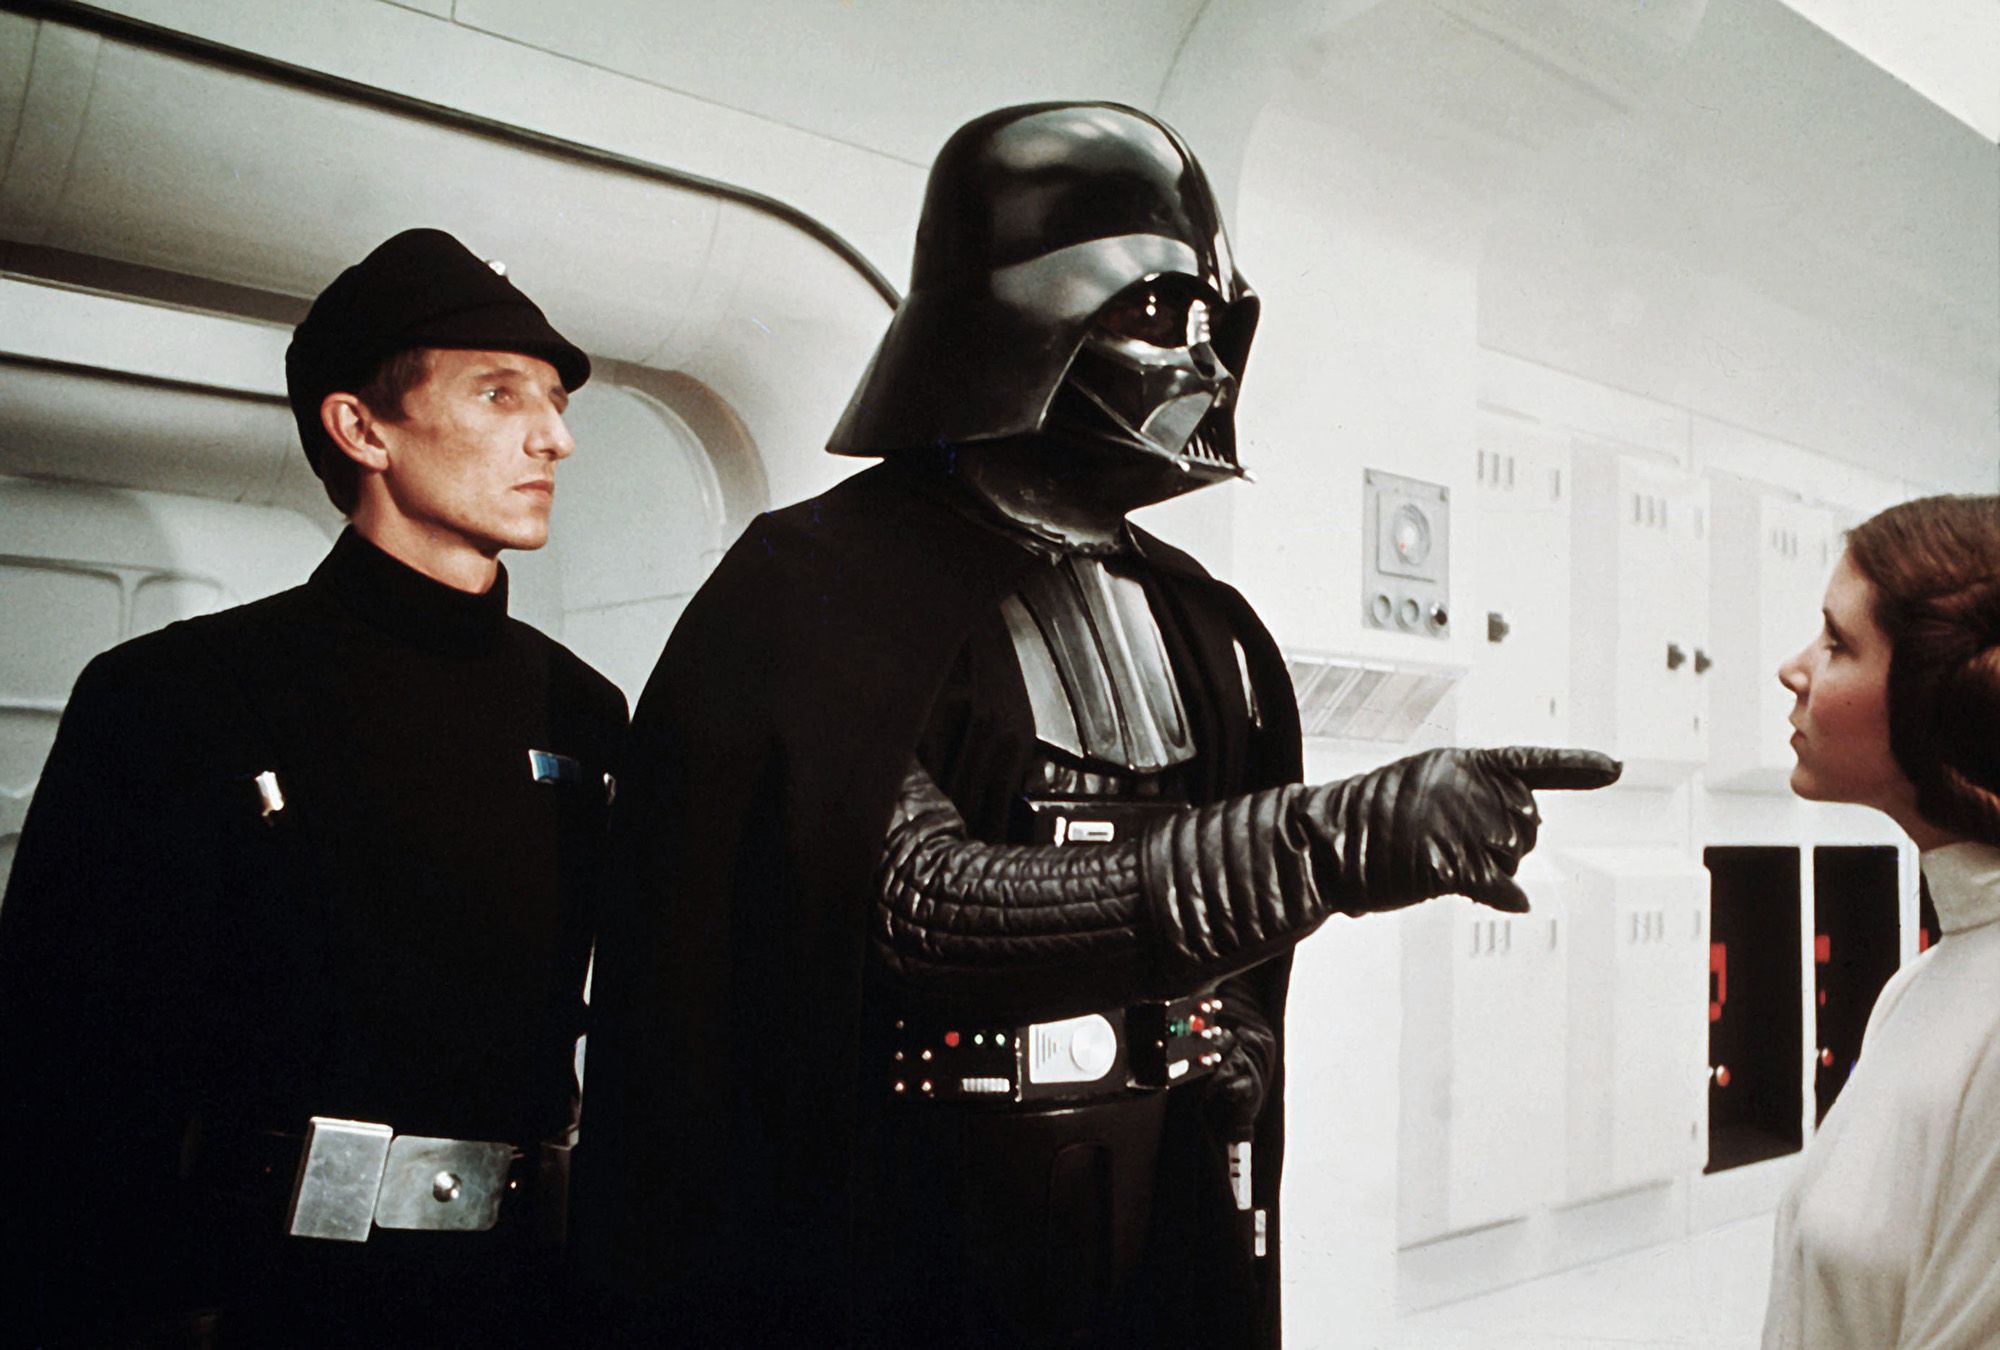 There Would Be No Darth Vader Without James Earl Jones' Voice